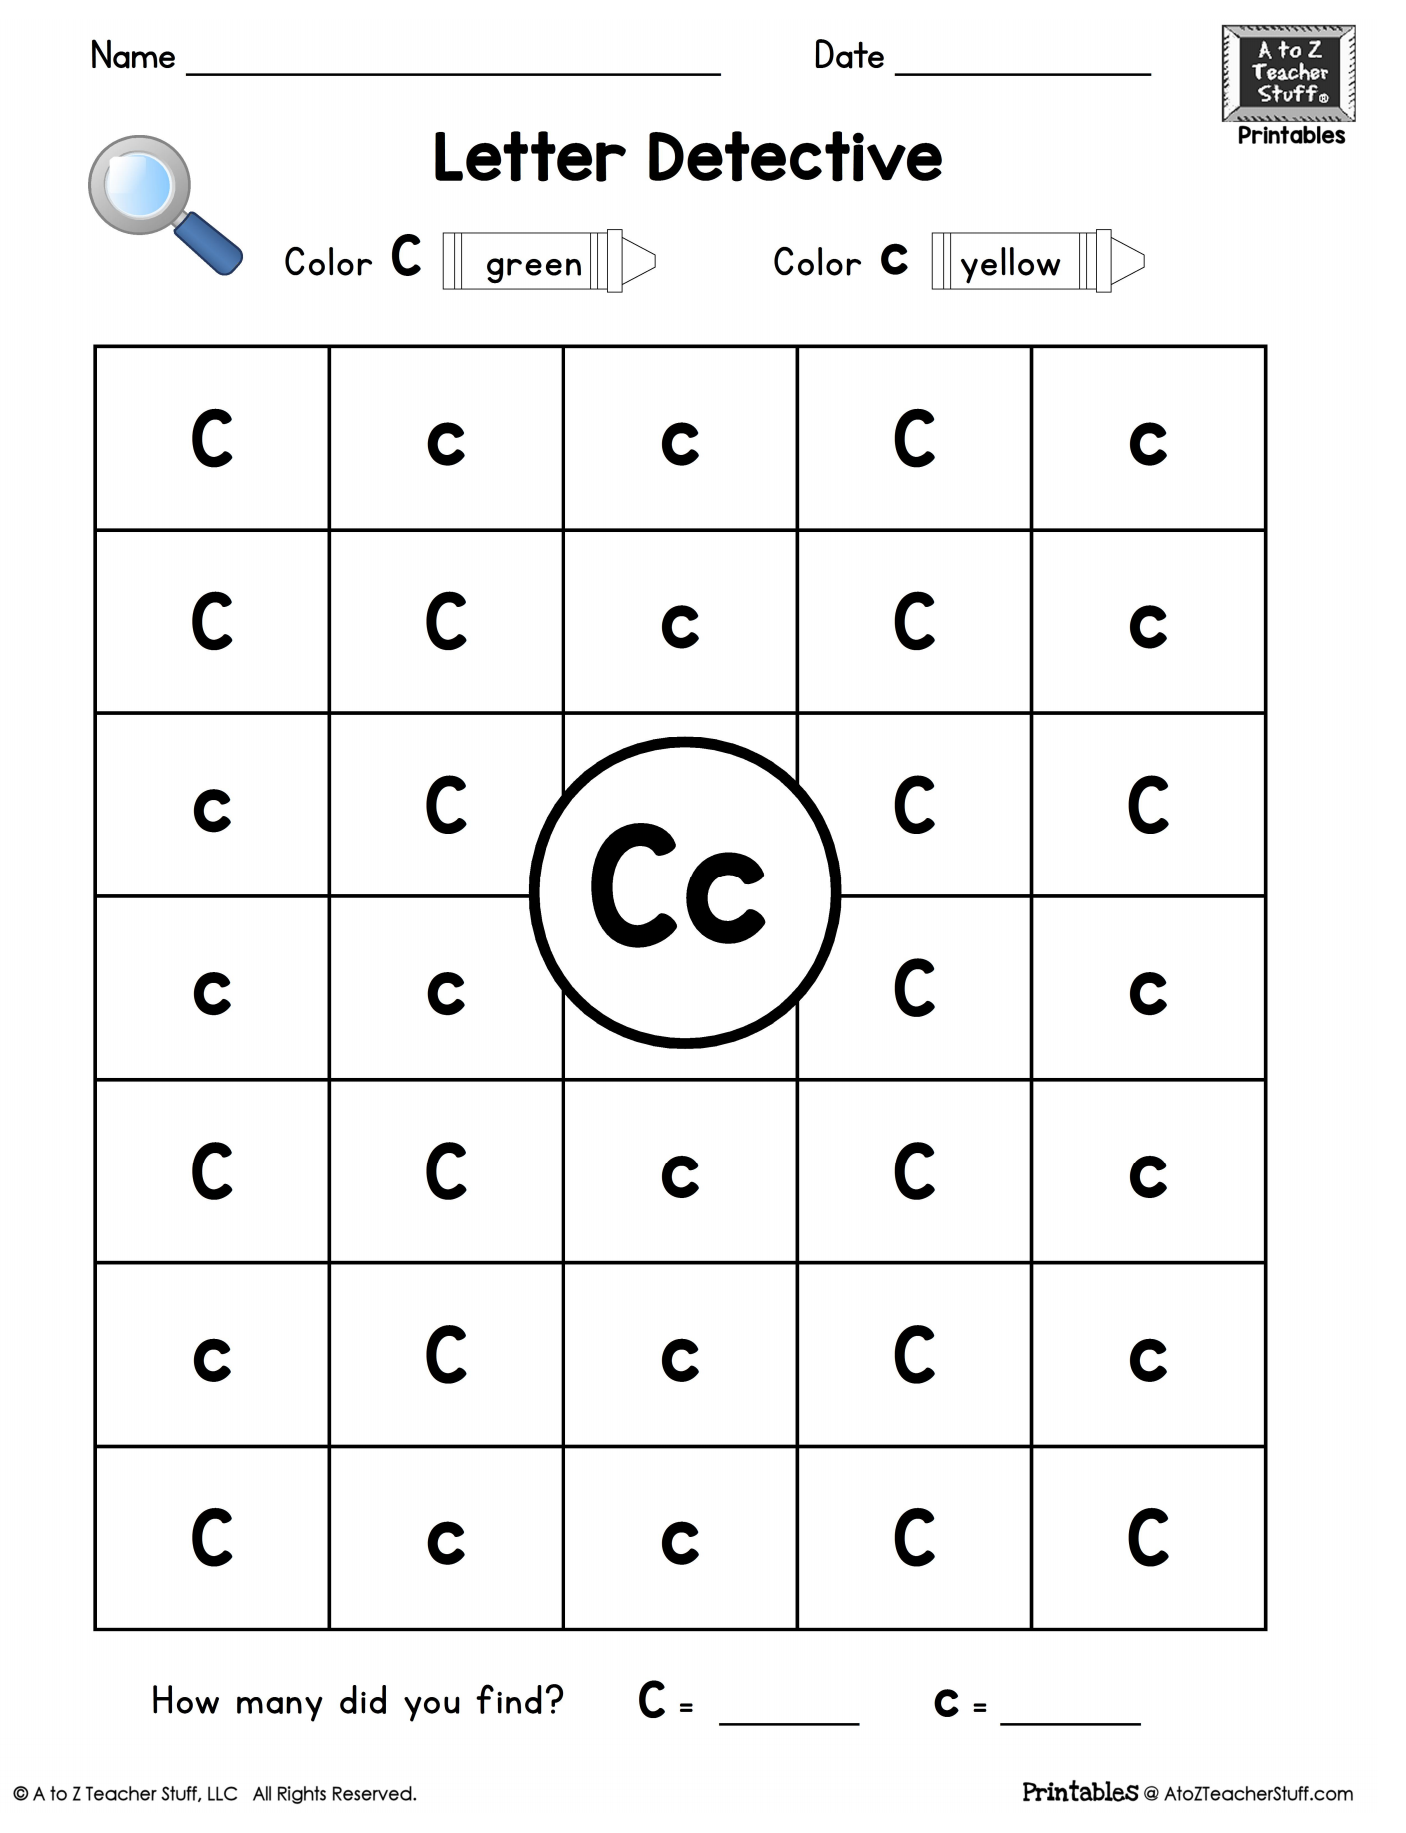 Letter c letter detective uppercase lowercase visual discrimination a to z teacher stuff printable pages and worksheets